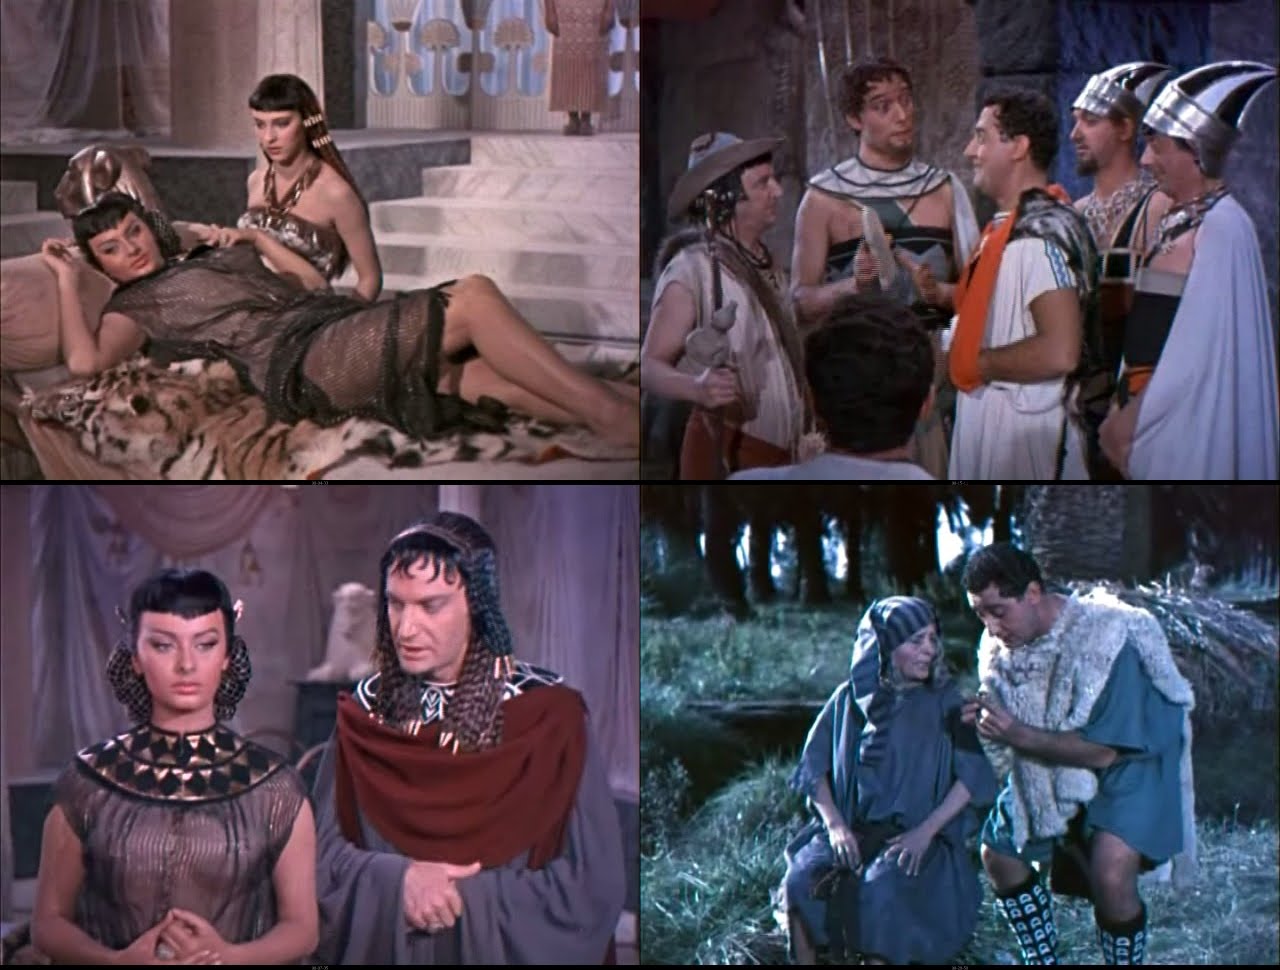 TWO NIGHTS WITH CLEOPATRA - Sort of an Italian CARRY ON CLEO? 